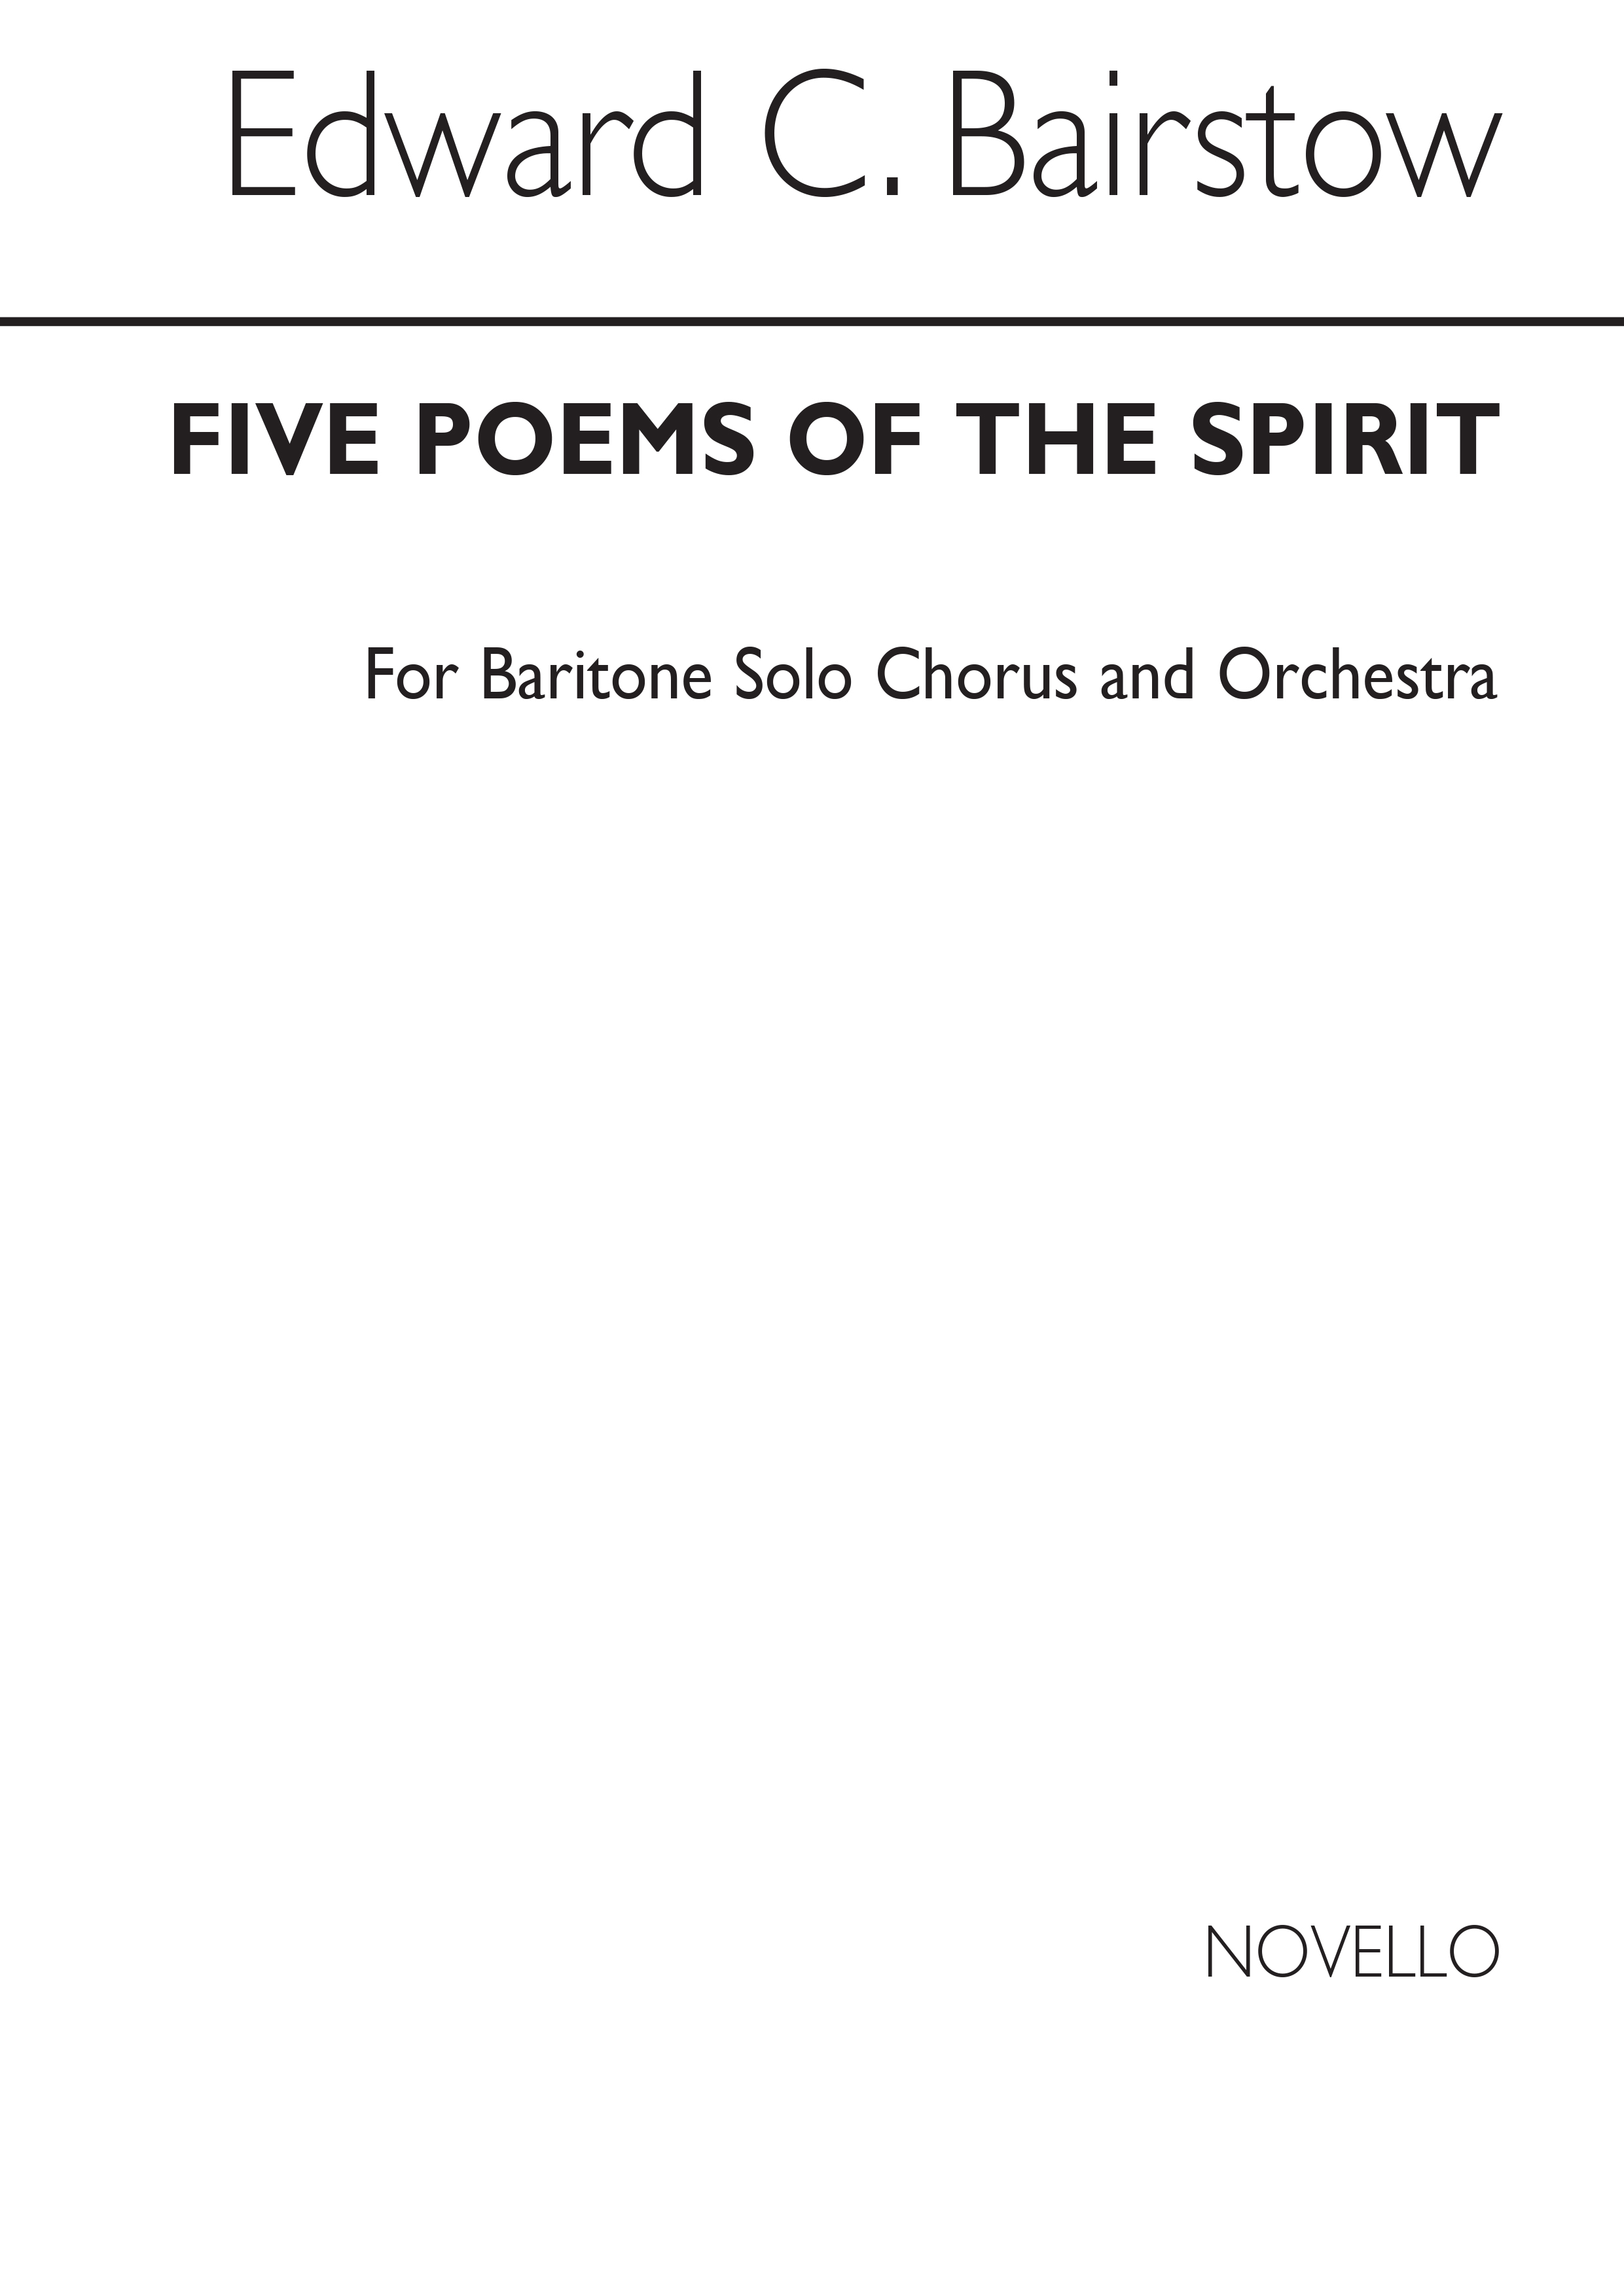 Edward C. Bairstow: Five Poems Of The Spirit